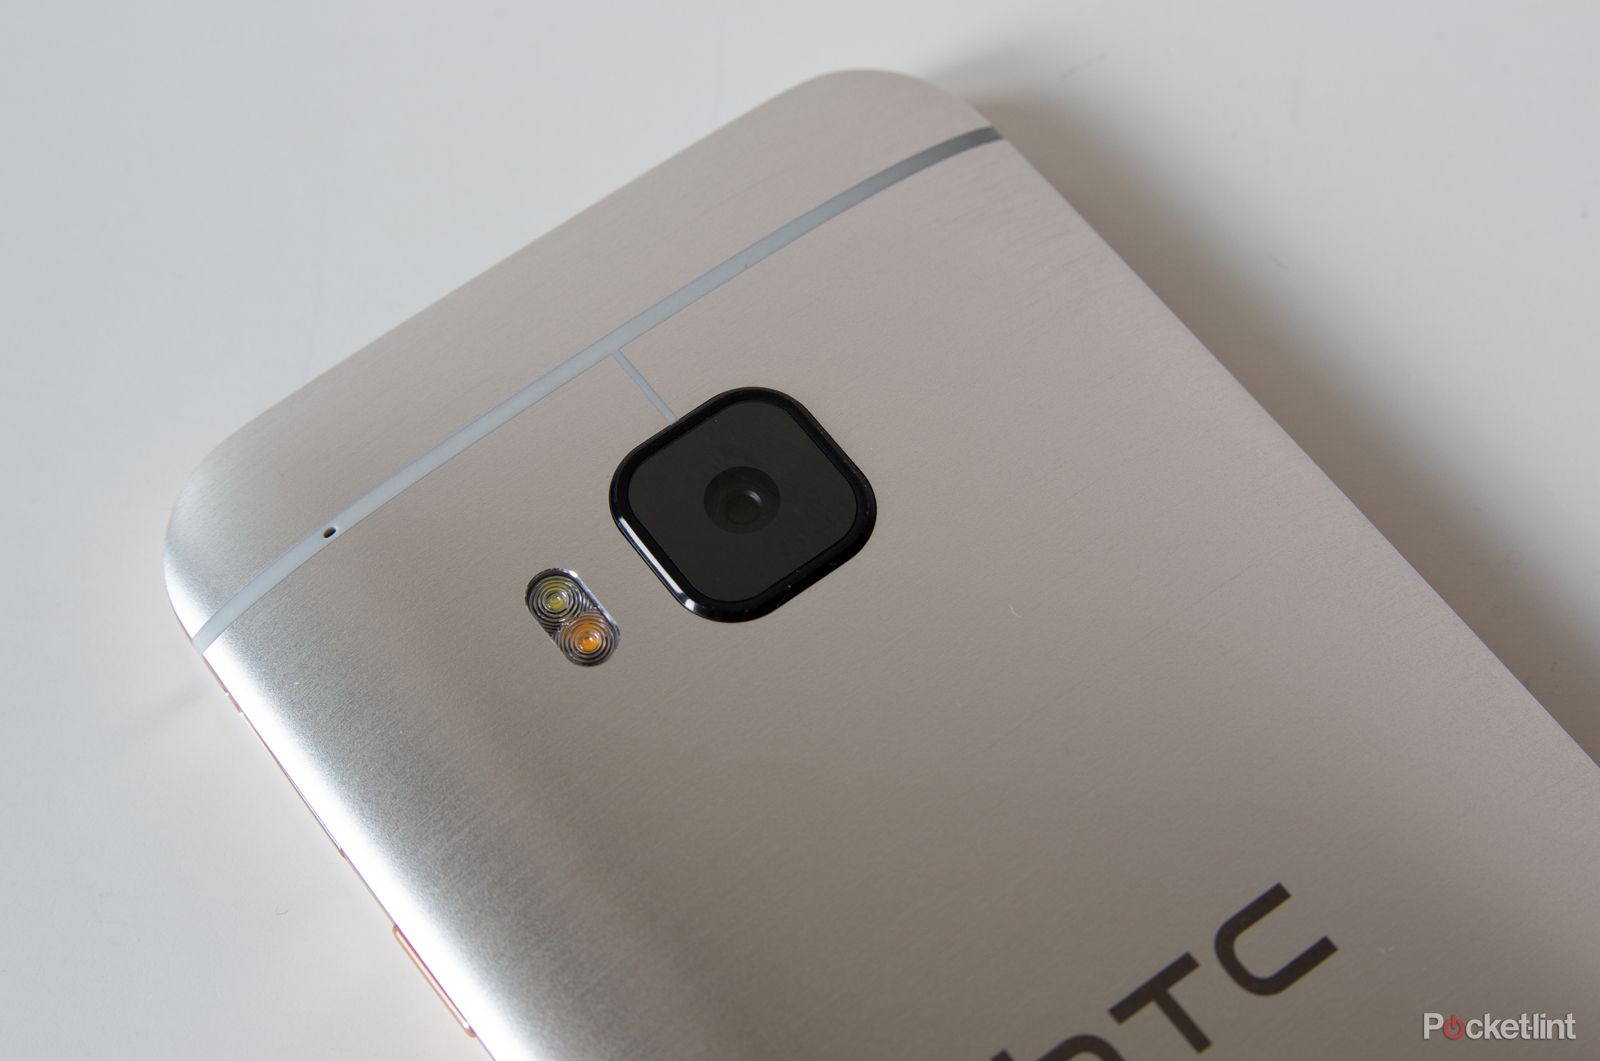 new htc one a9 specs leak suggests aero will be a mid range smartphone not premium image 1